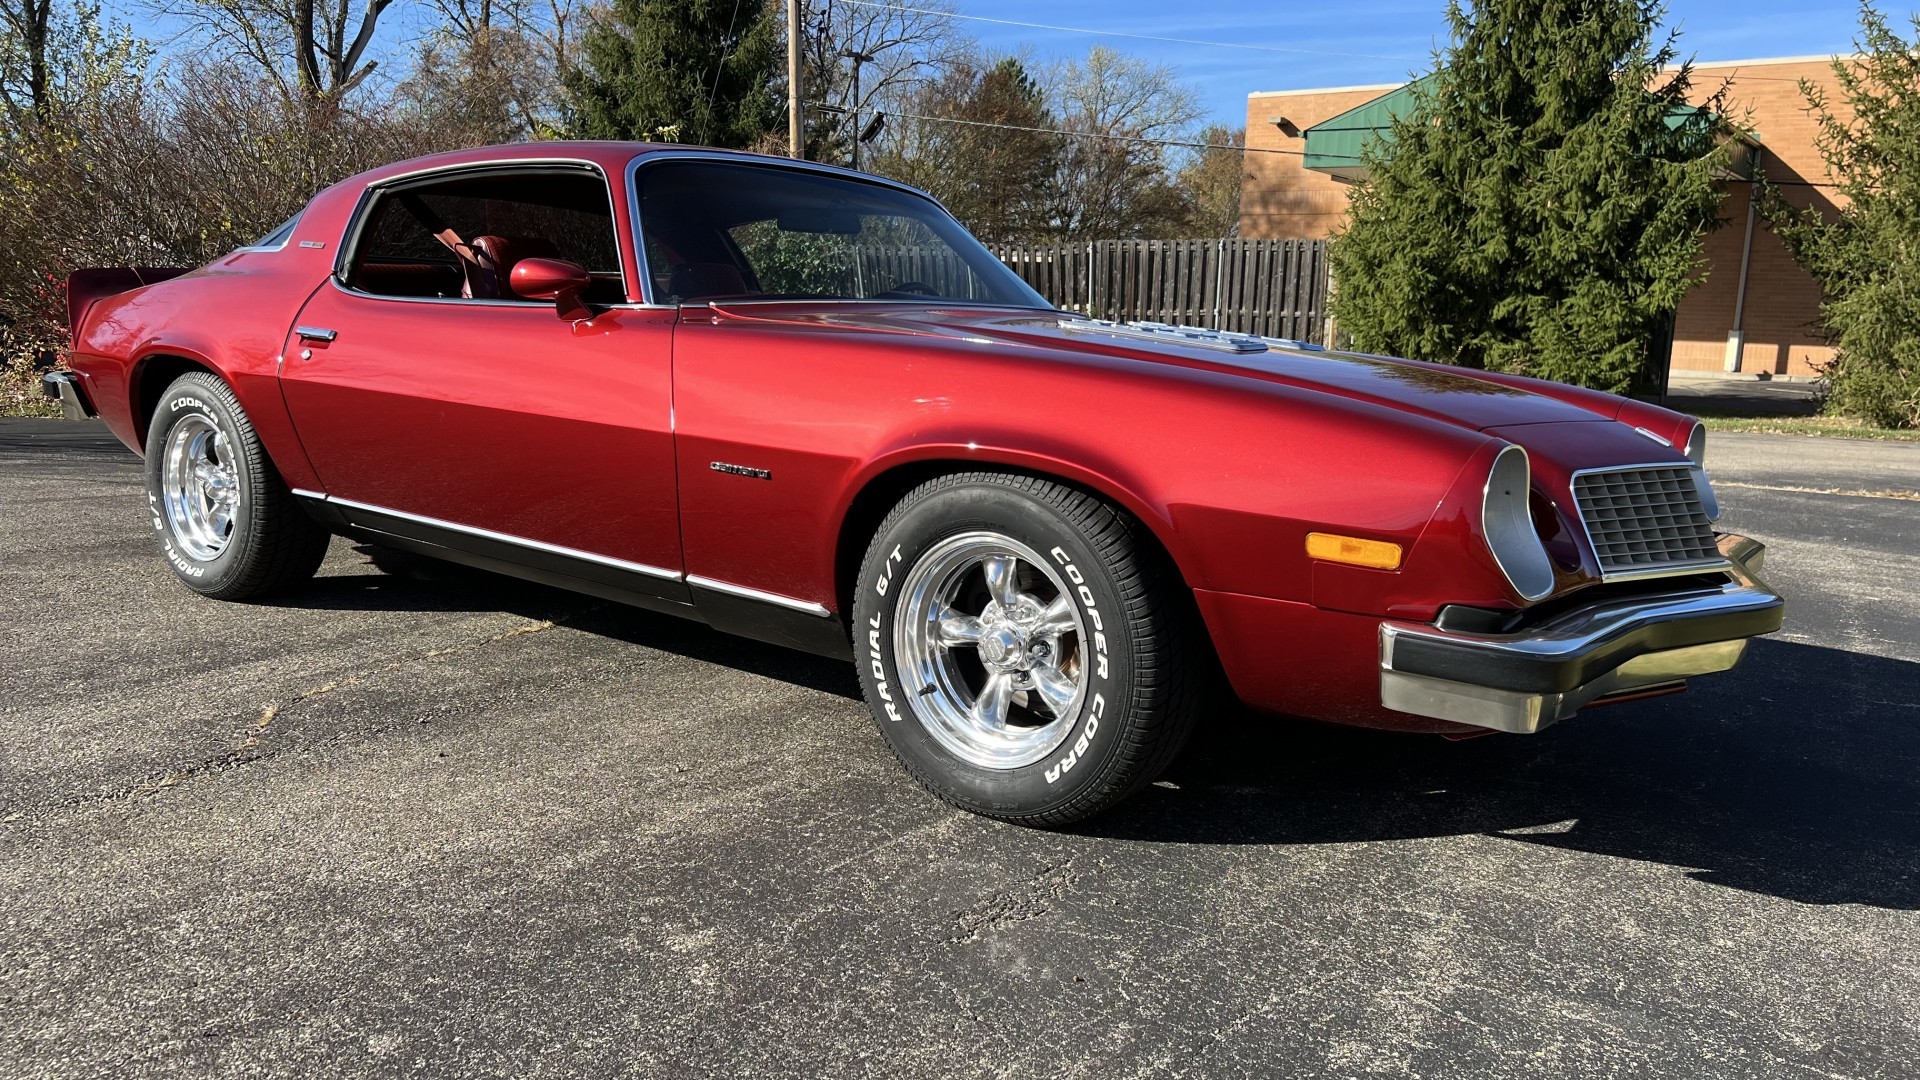 1975 Chevy Camaro Type LT, 350 Crate Engine, Sold! | Cincy Classic Cars